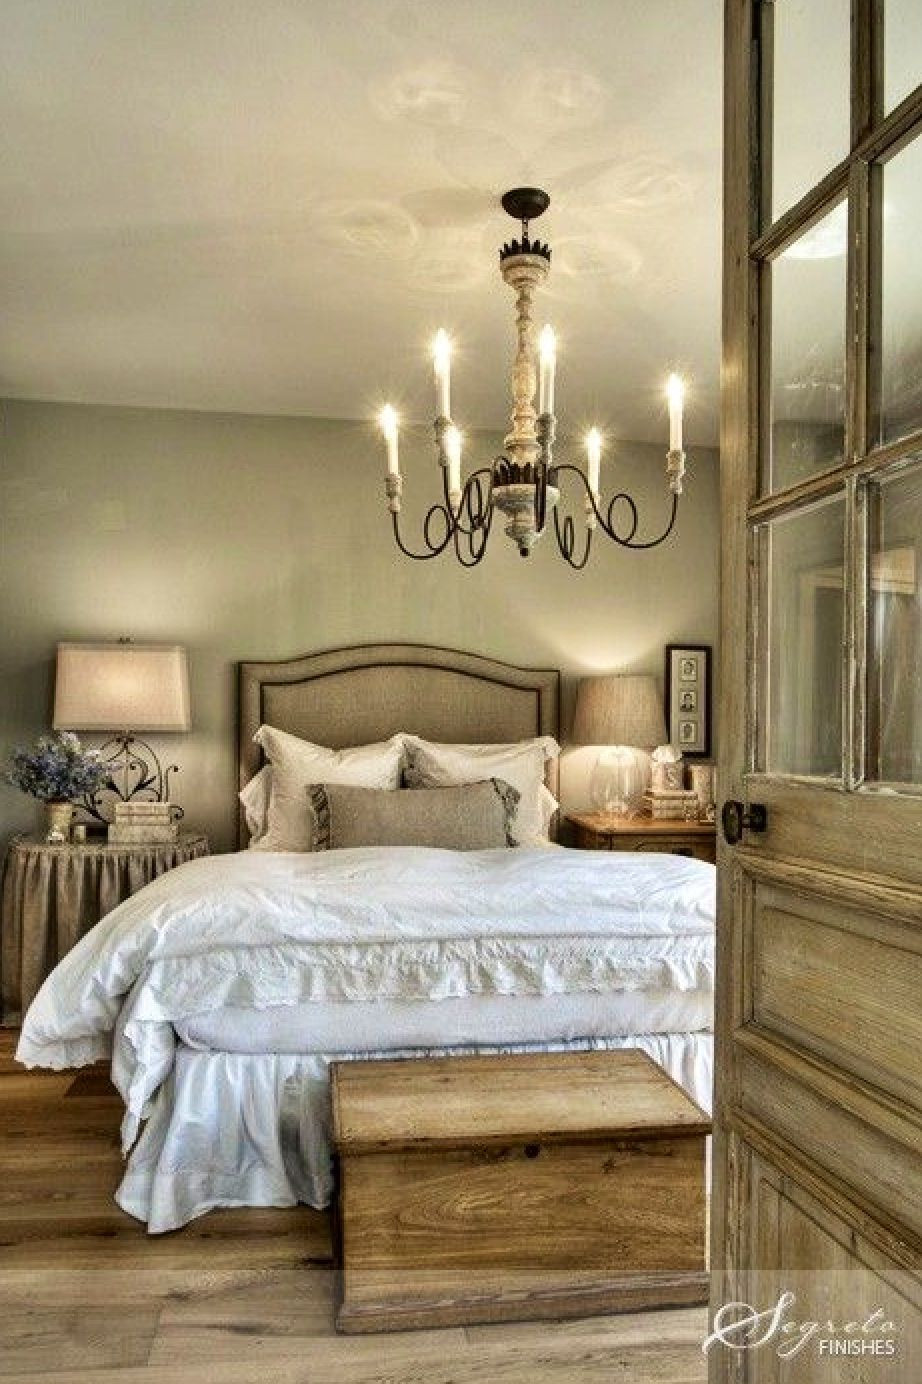 Rustic Romantic Bedroom
 LOVE this rustic AND romantic bedroom bedrooms